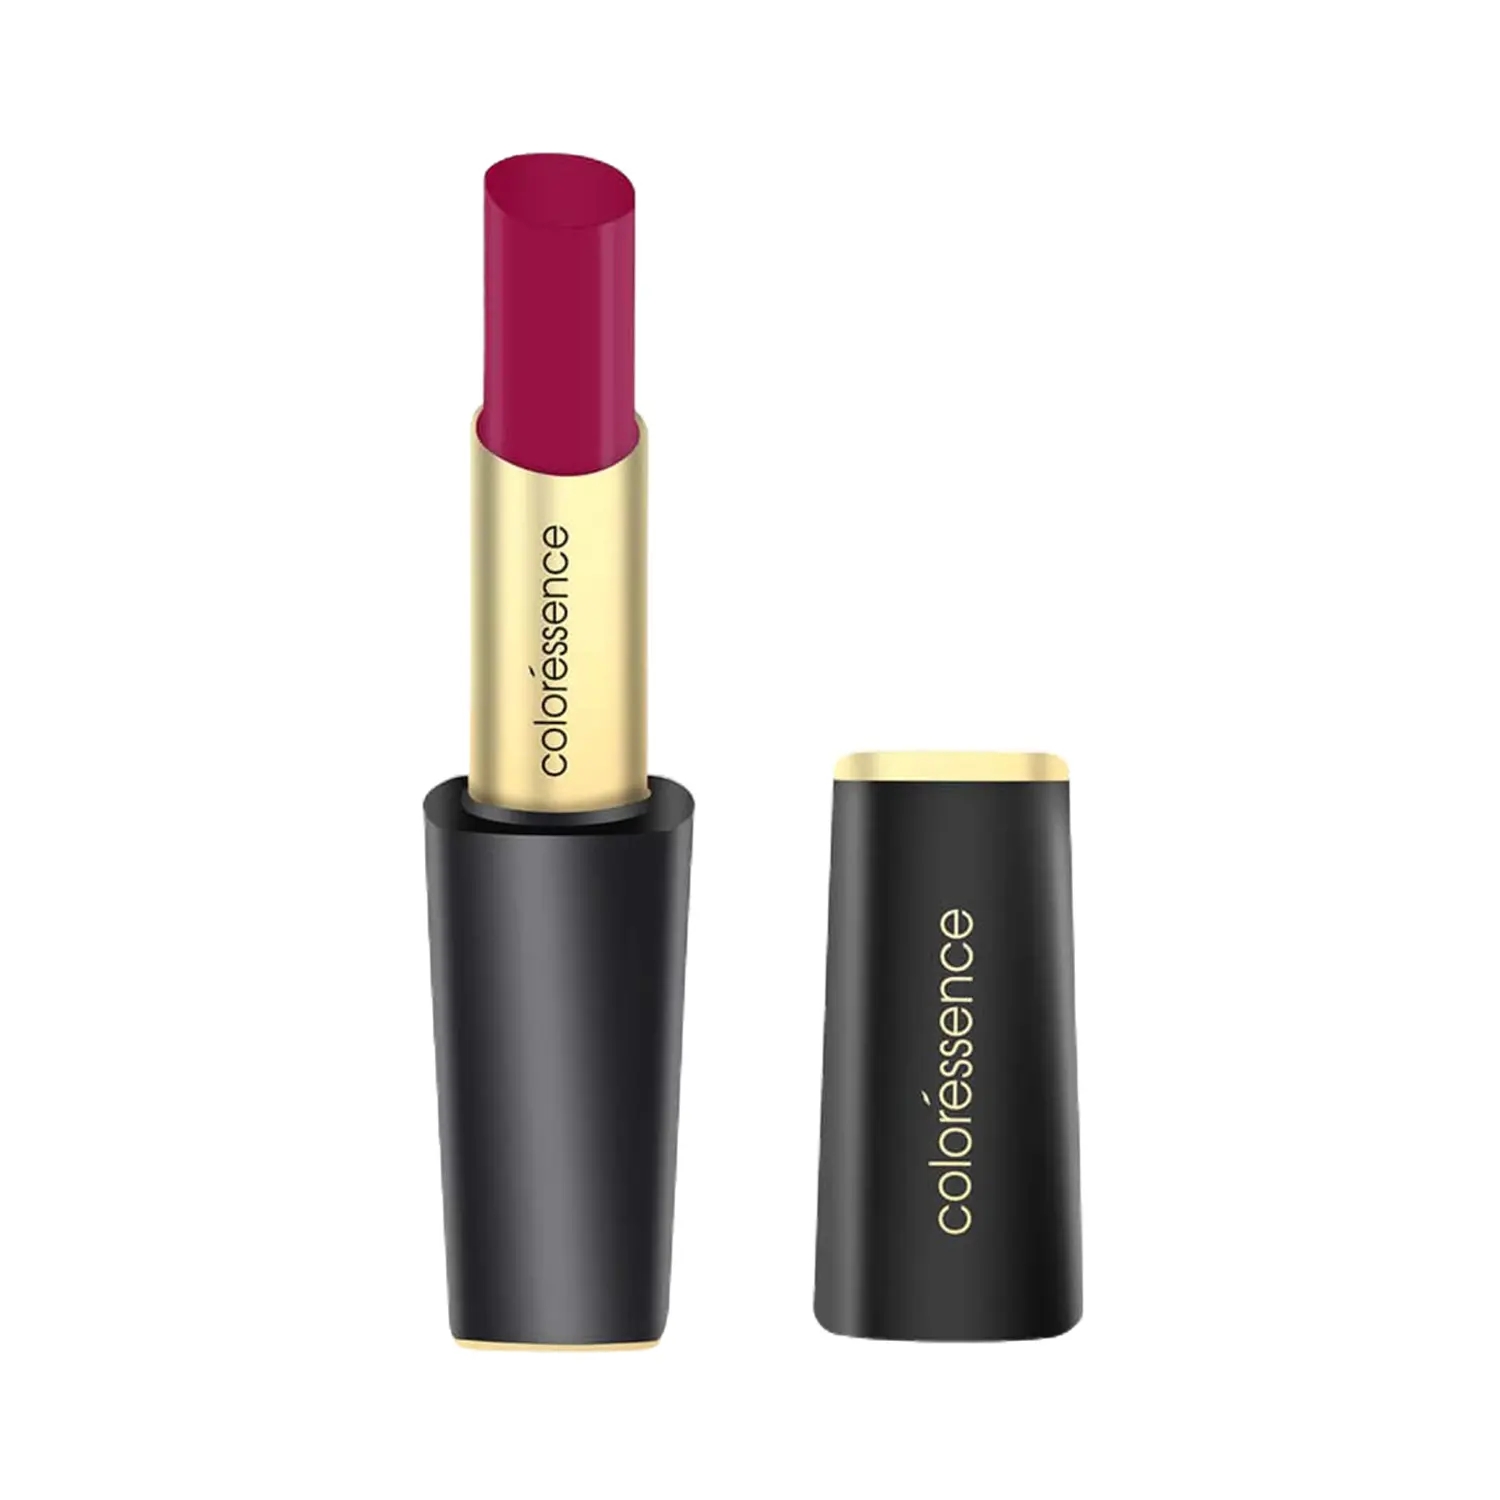 Coloressence | Coloressence Intense Long Wear Lip Color Glossy Lipstick - Forever For Love (2.5g)